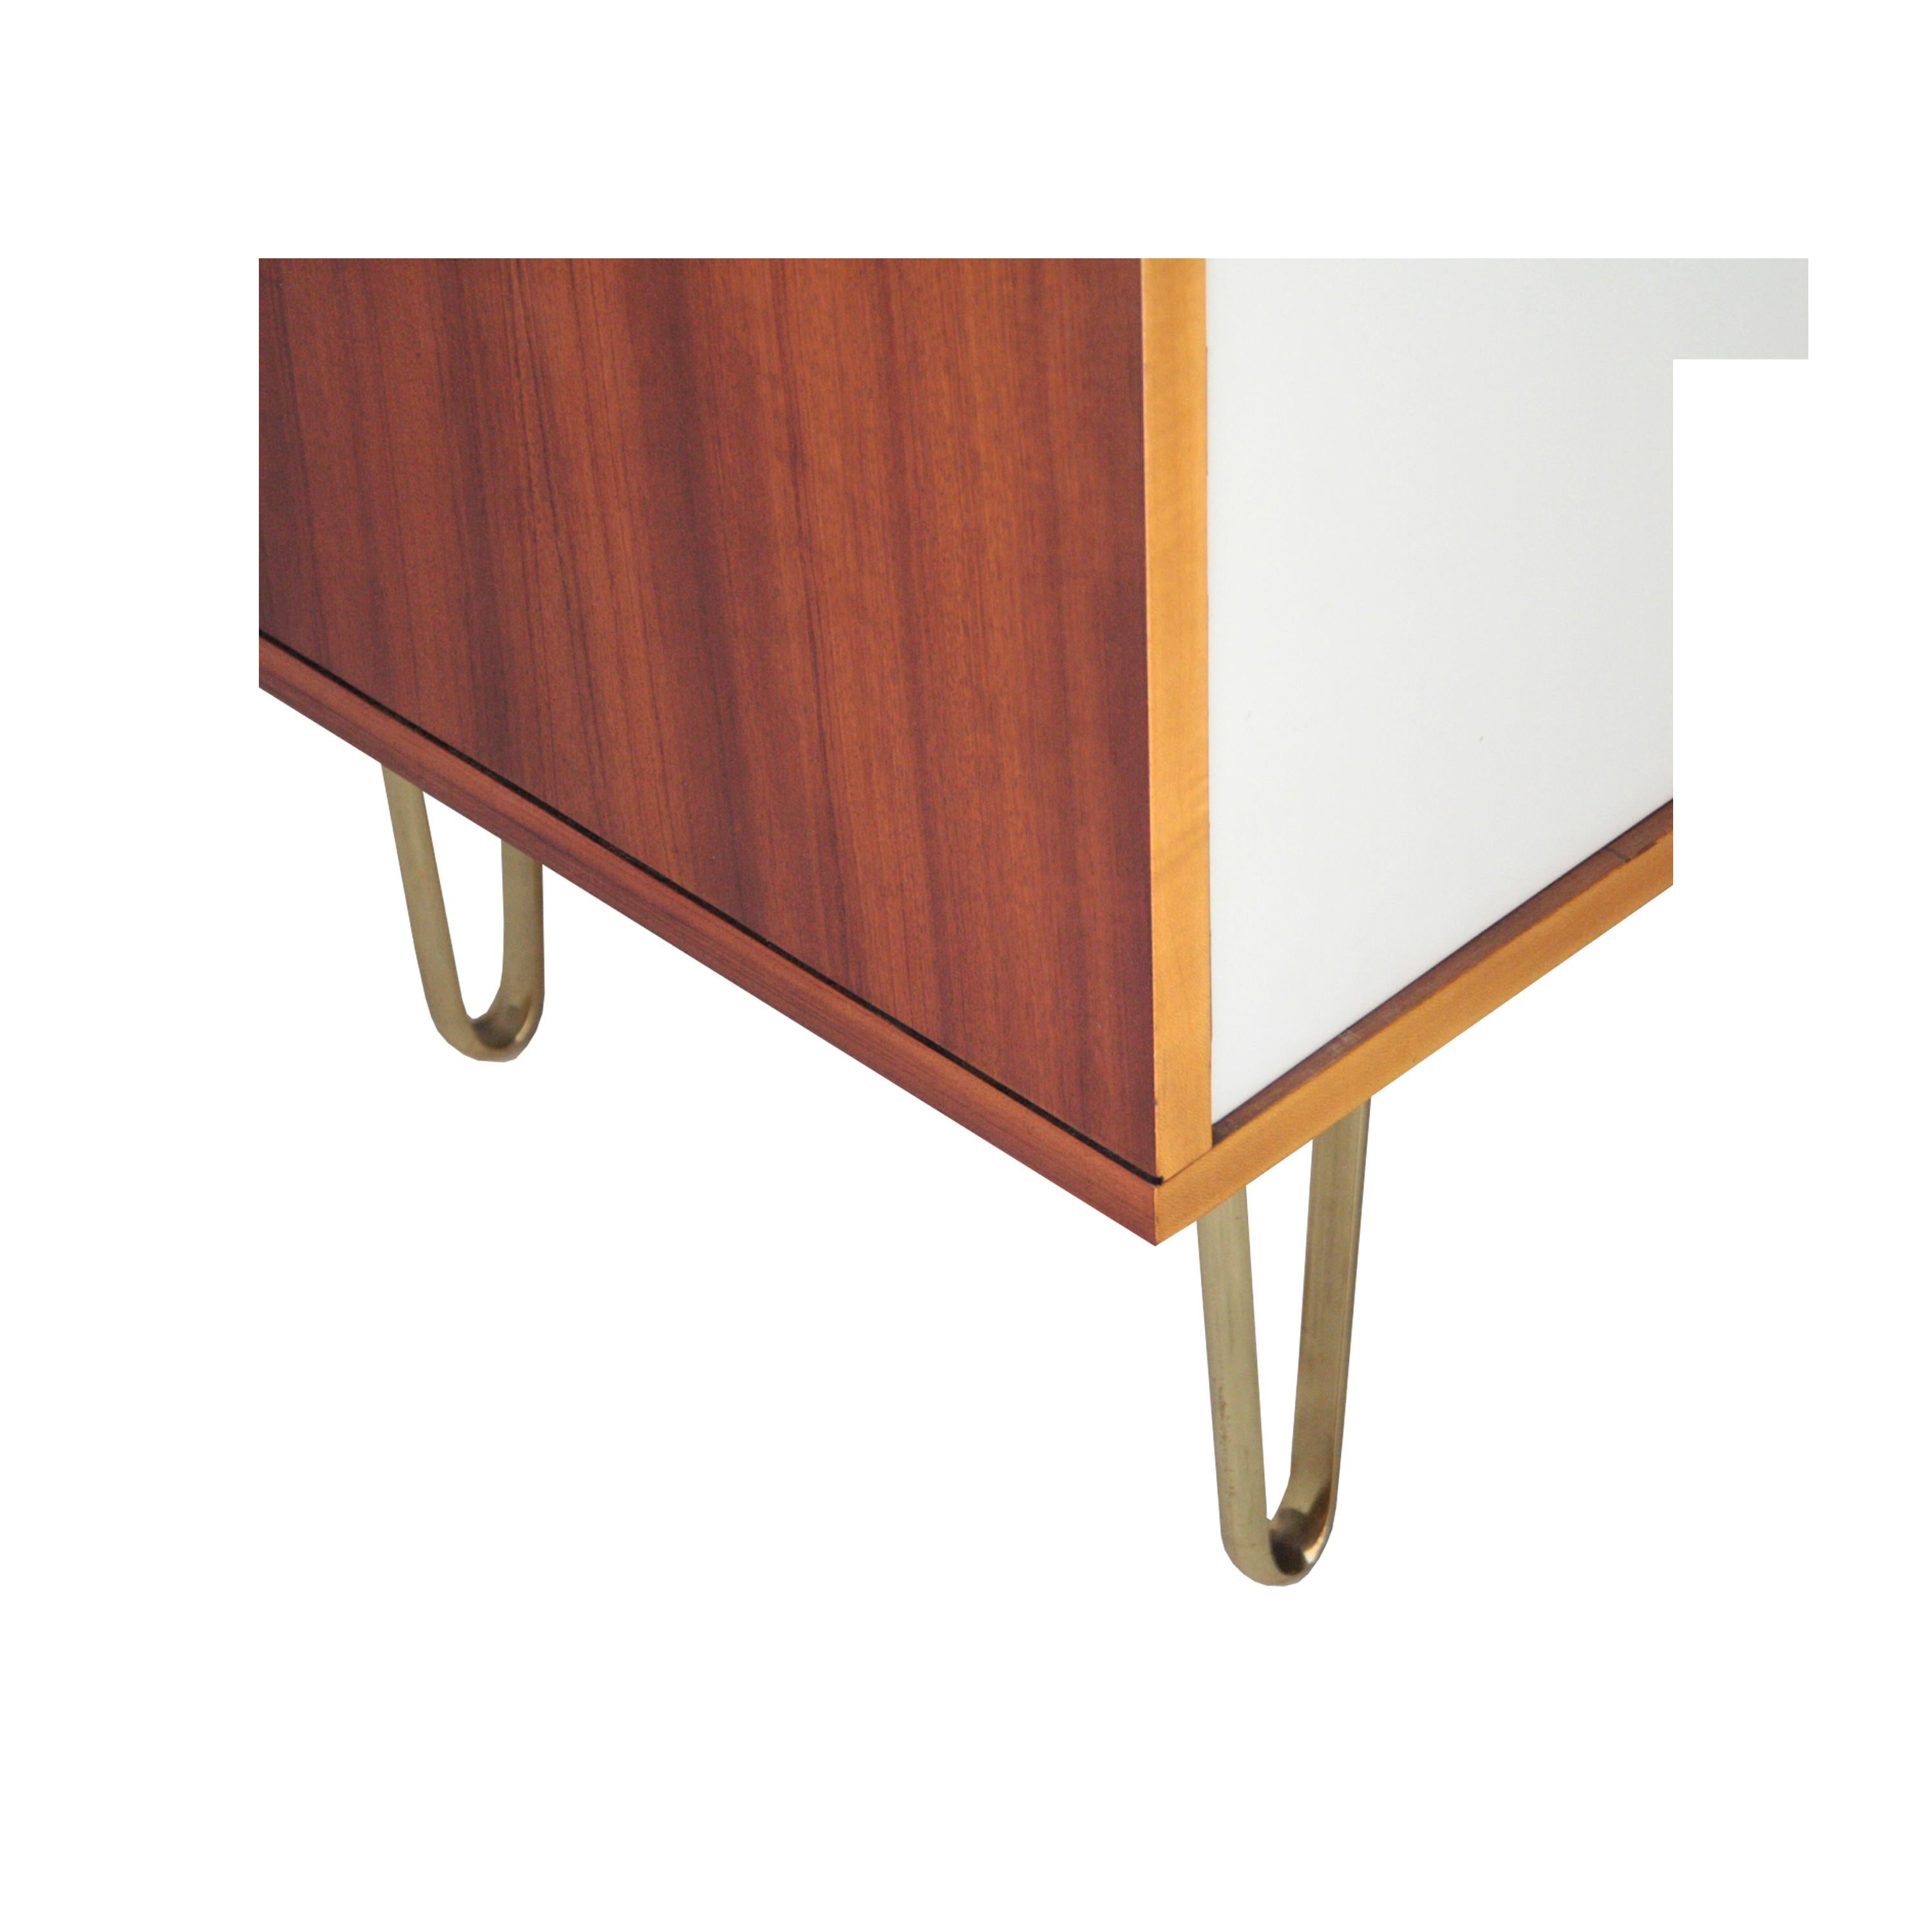 Mid-20th Century Sideboard Designed by Alfred Hendricks with Brass Details. Belgium, 1960